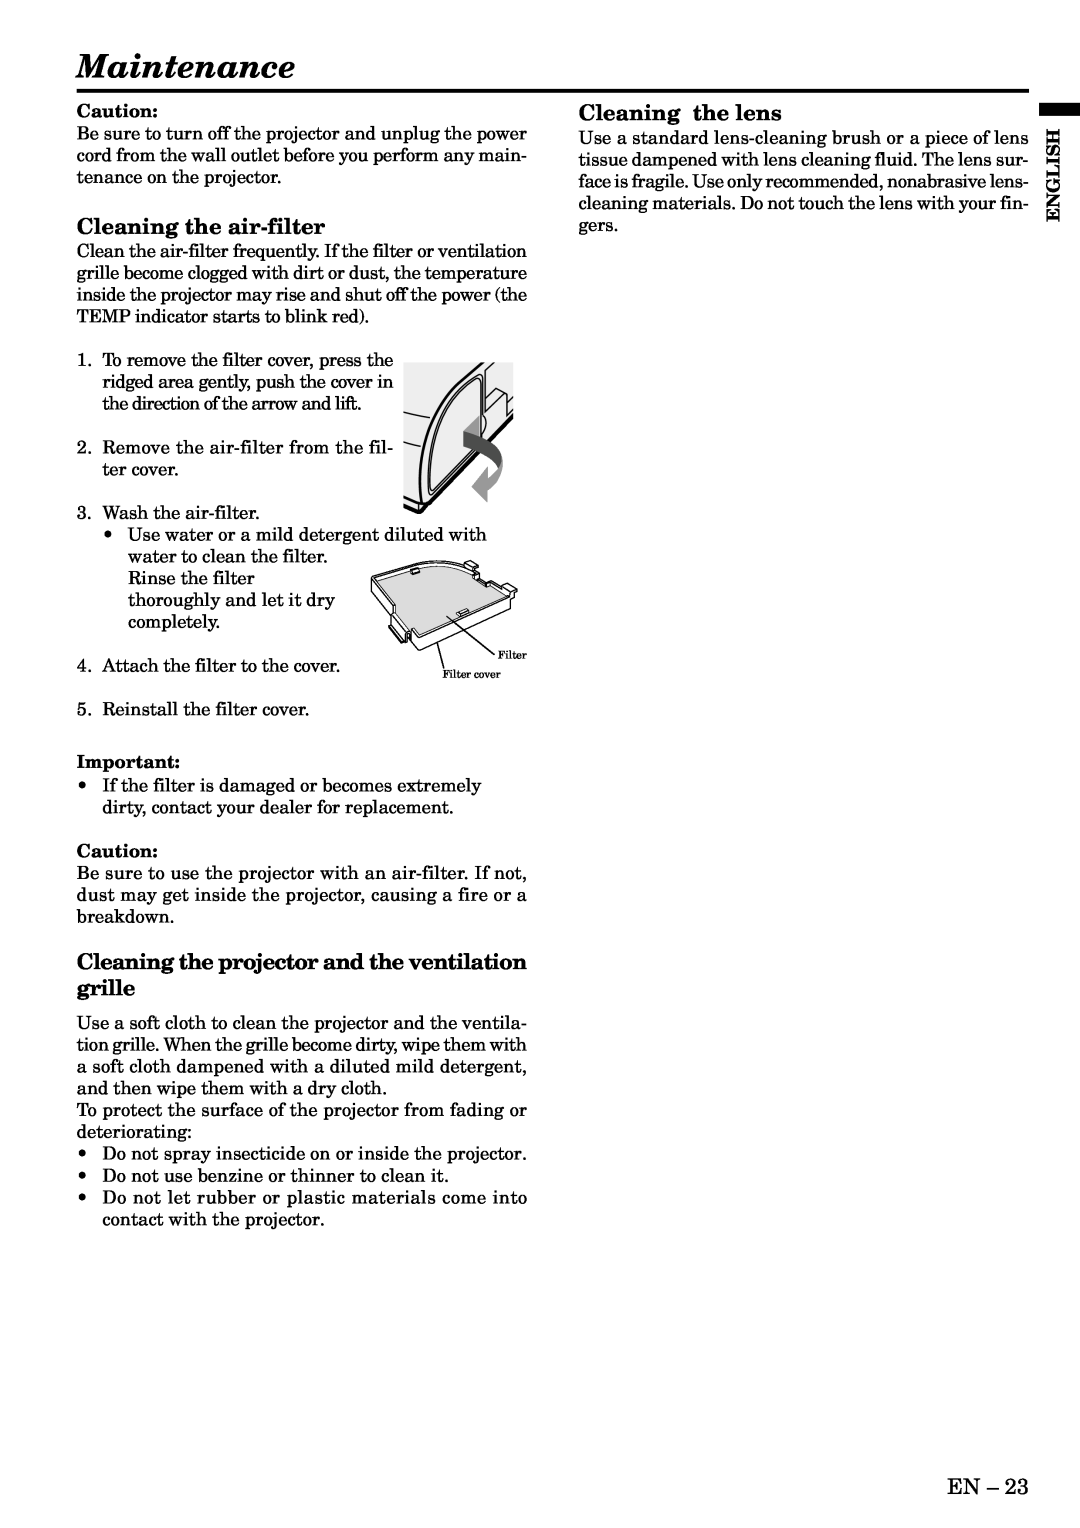 Mitsubishi Electronics XL1U user manual Maintenance, Cleaning the air-filter, Cleaning the lens, English 